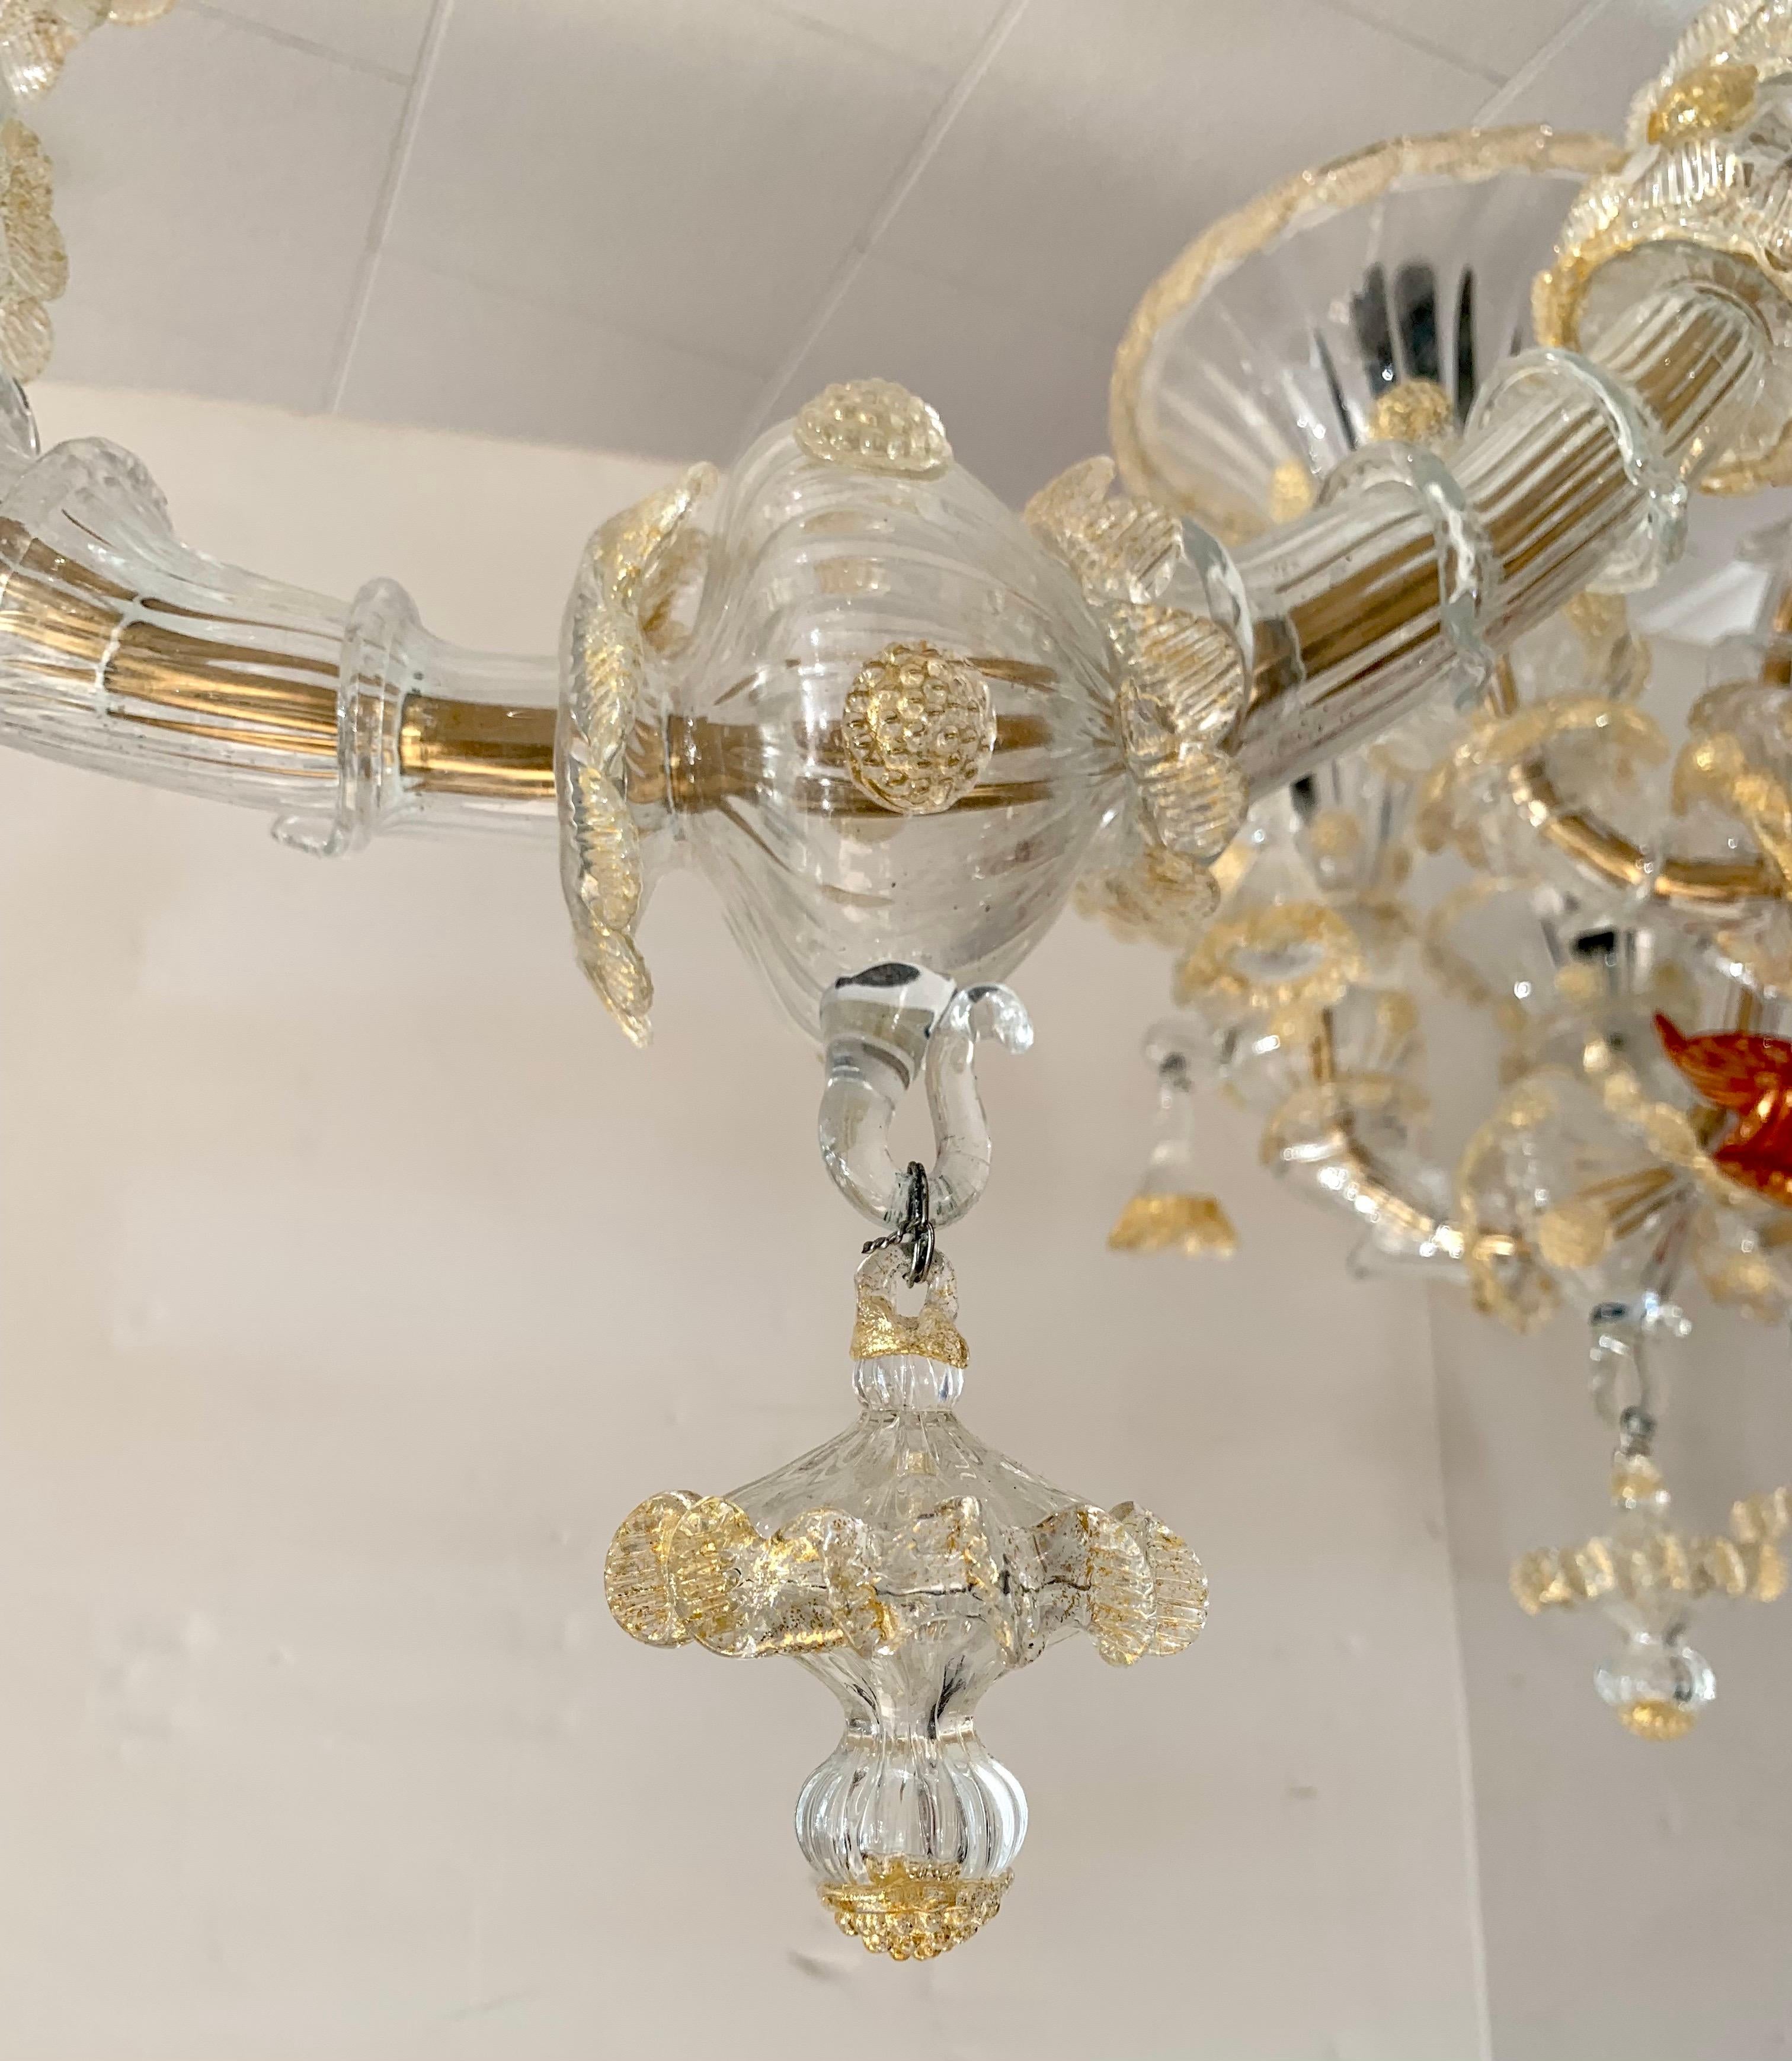 20th Century Exquisite Extra Large Murano Multi Color Glass Chandelier Made in Italy For Sale